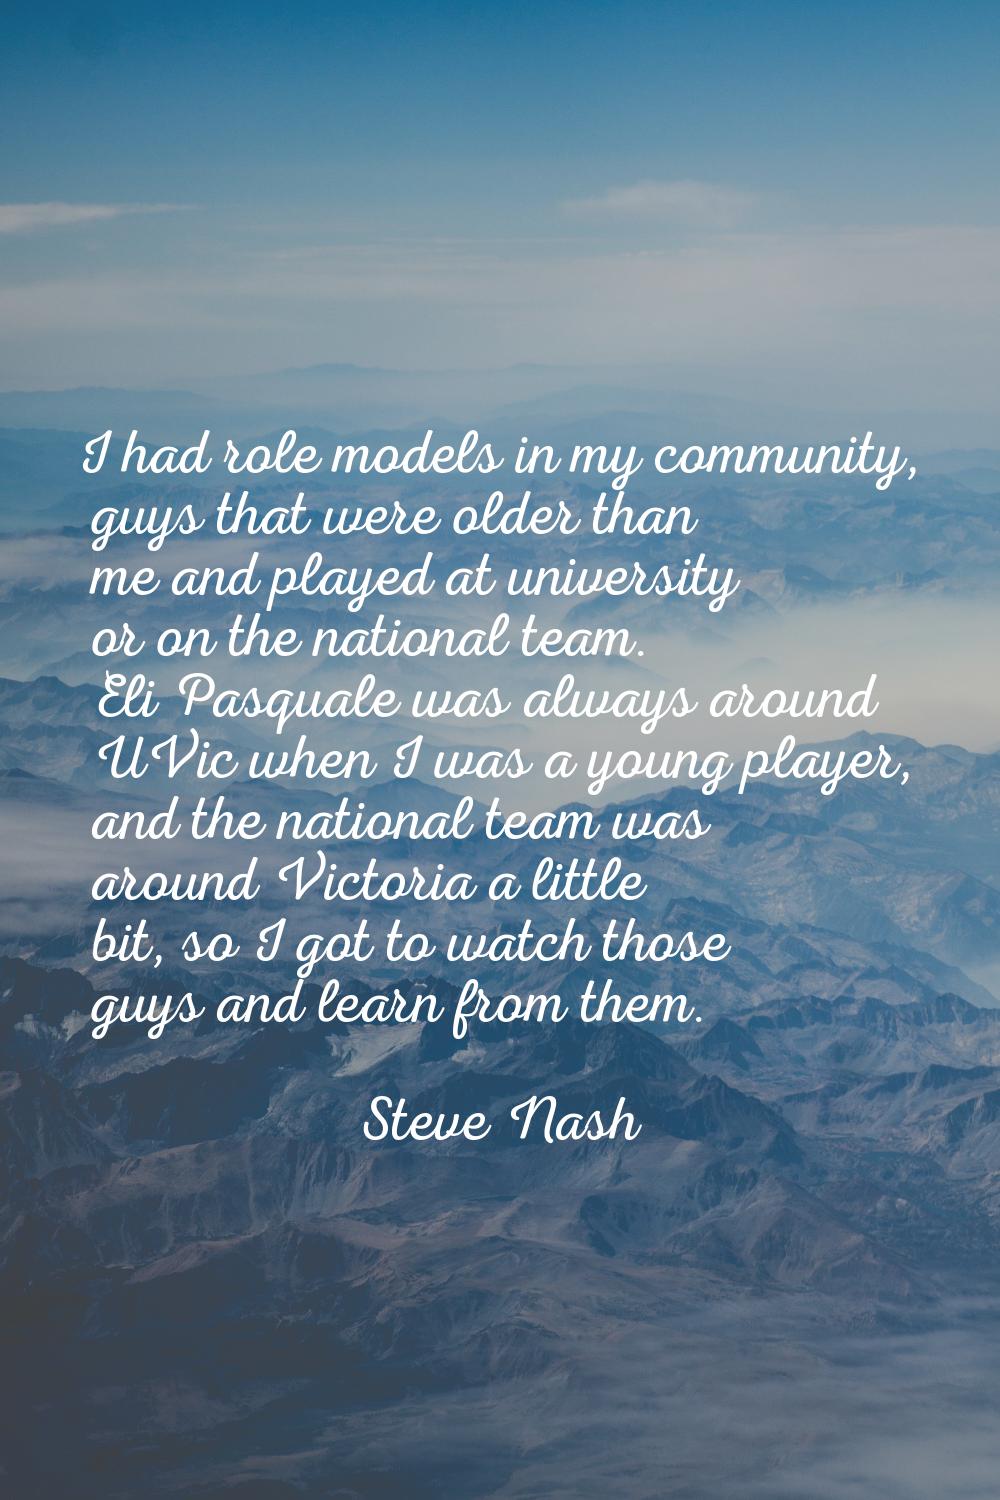 I had role models in my community, guys that were older than me and played at university or on the 